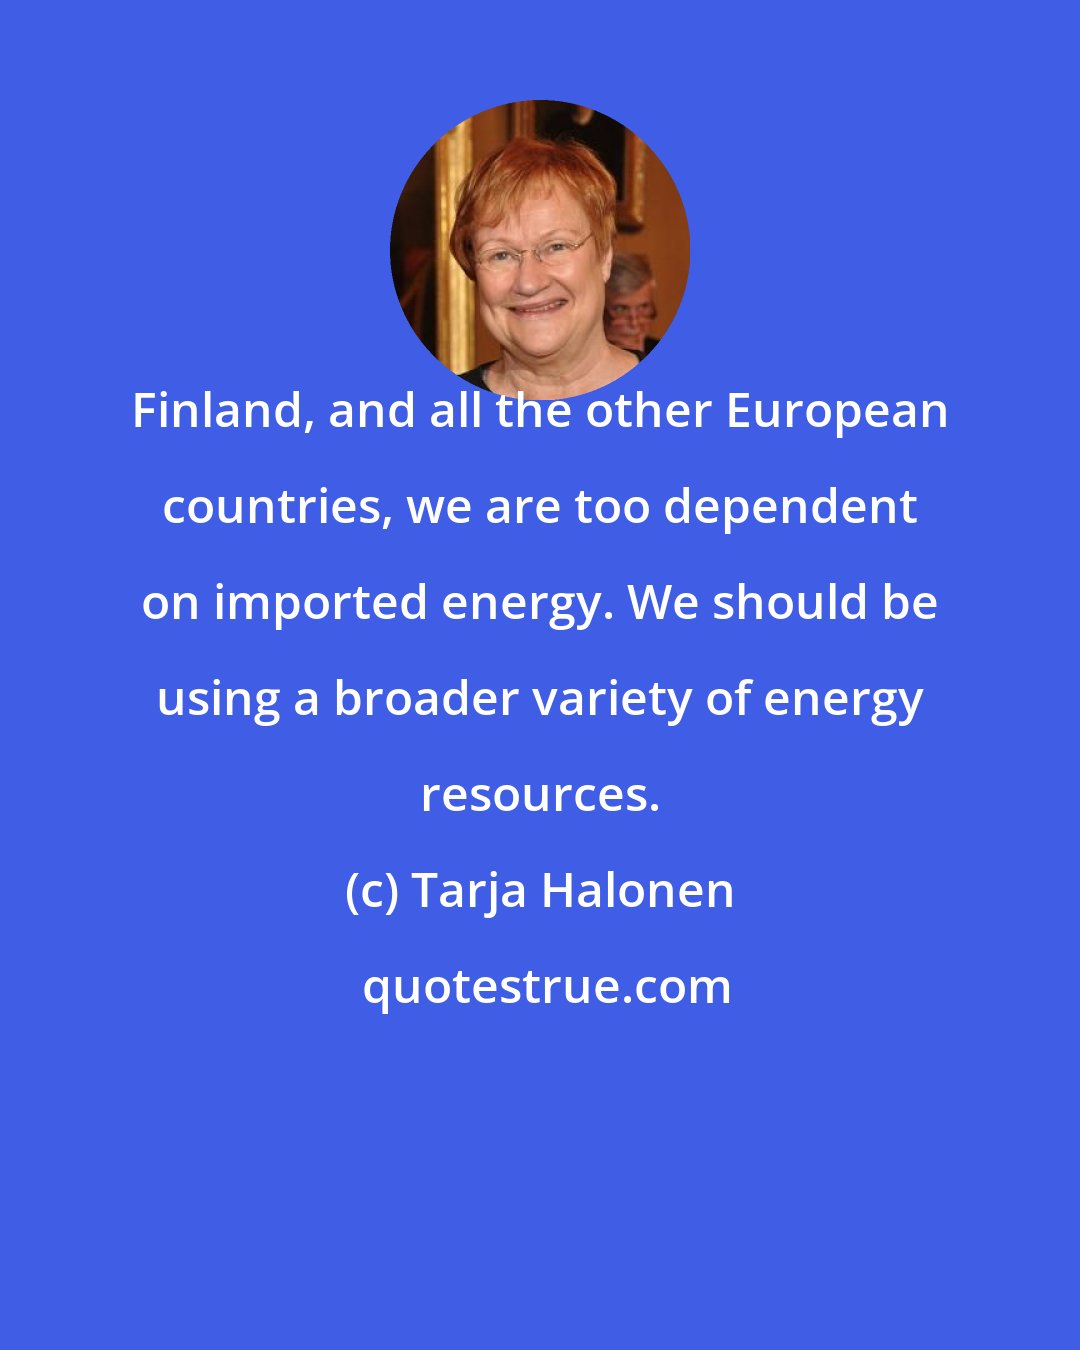 Tarja Halonen: Finland, and all the other European countries, we are too dependent on imported energy. We should be using a broader variety of energy resources.